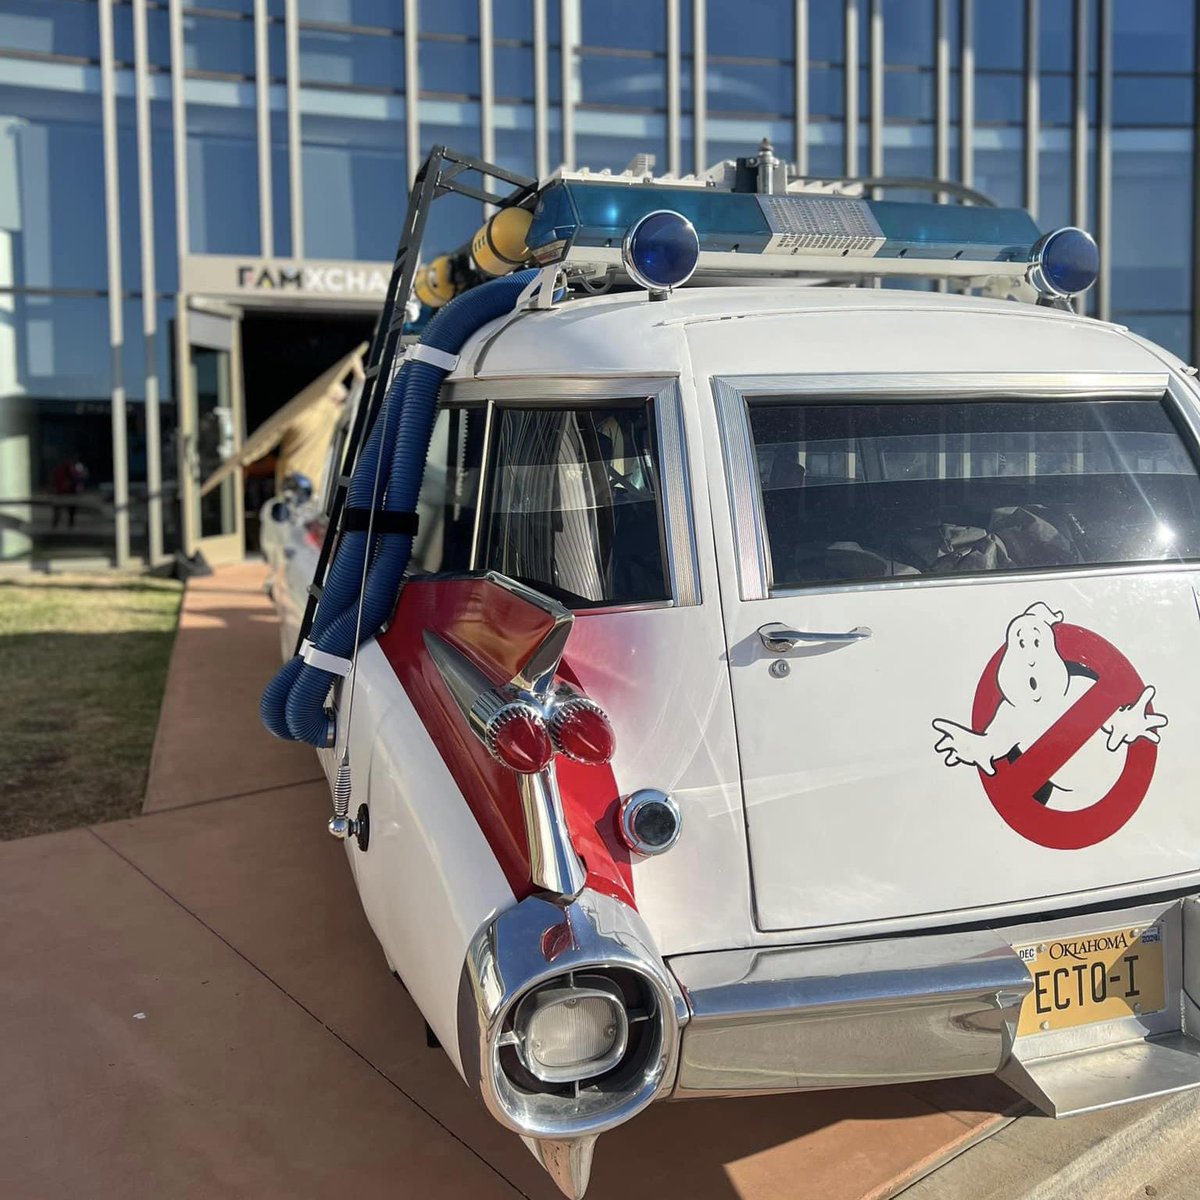 indigipop_x 20s
@OKCGhostbusters and Ecto-1 have entered the building for #indigipopx2024! The Expo starts in 35 minutes at @firstamericansmuseum! We'll see you there!
#PXatFAM #IndiginerdsAssemble
#EveryoneWelcome #PX2024 #whoyagonnacall